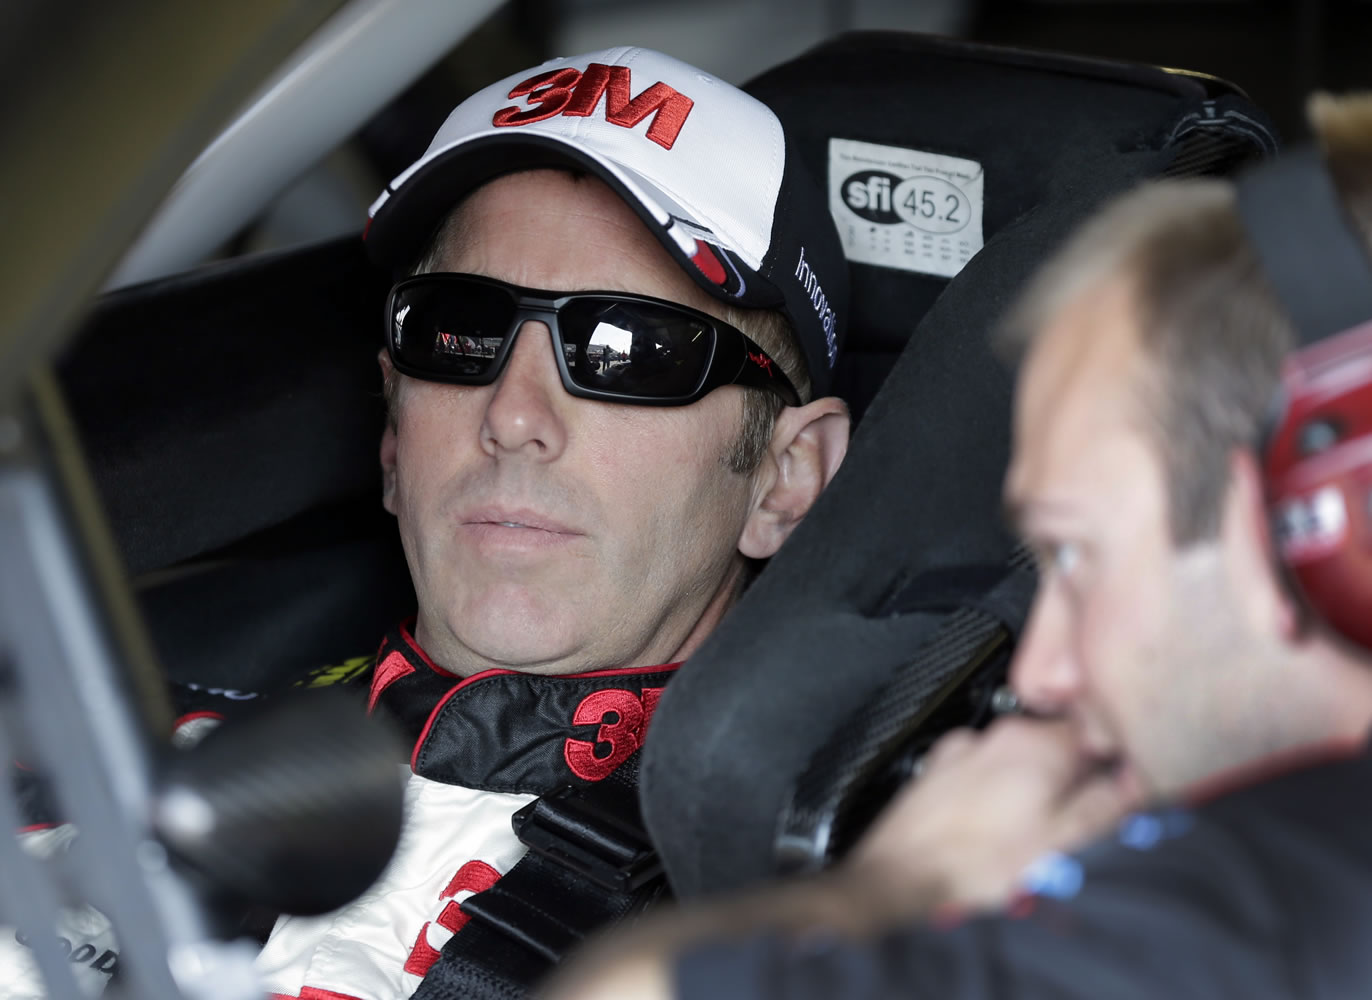 Greg Biffle, left, talks to a crew member before a NASCAR Sprint Cup series auto race practice at Darlington Speedway in Darlington, S.C., Friday.